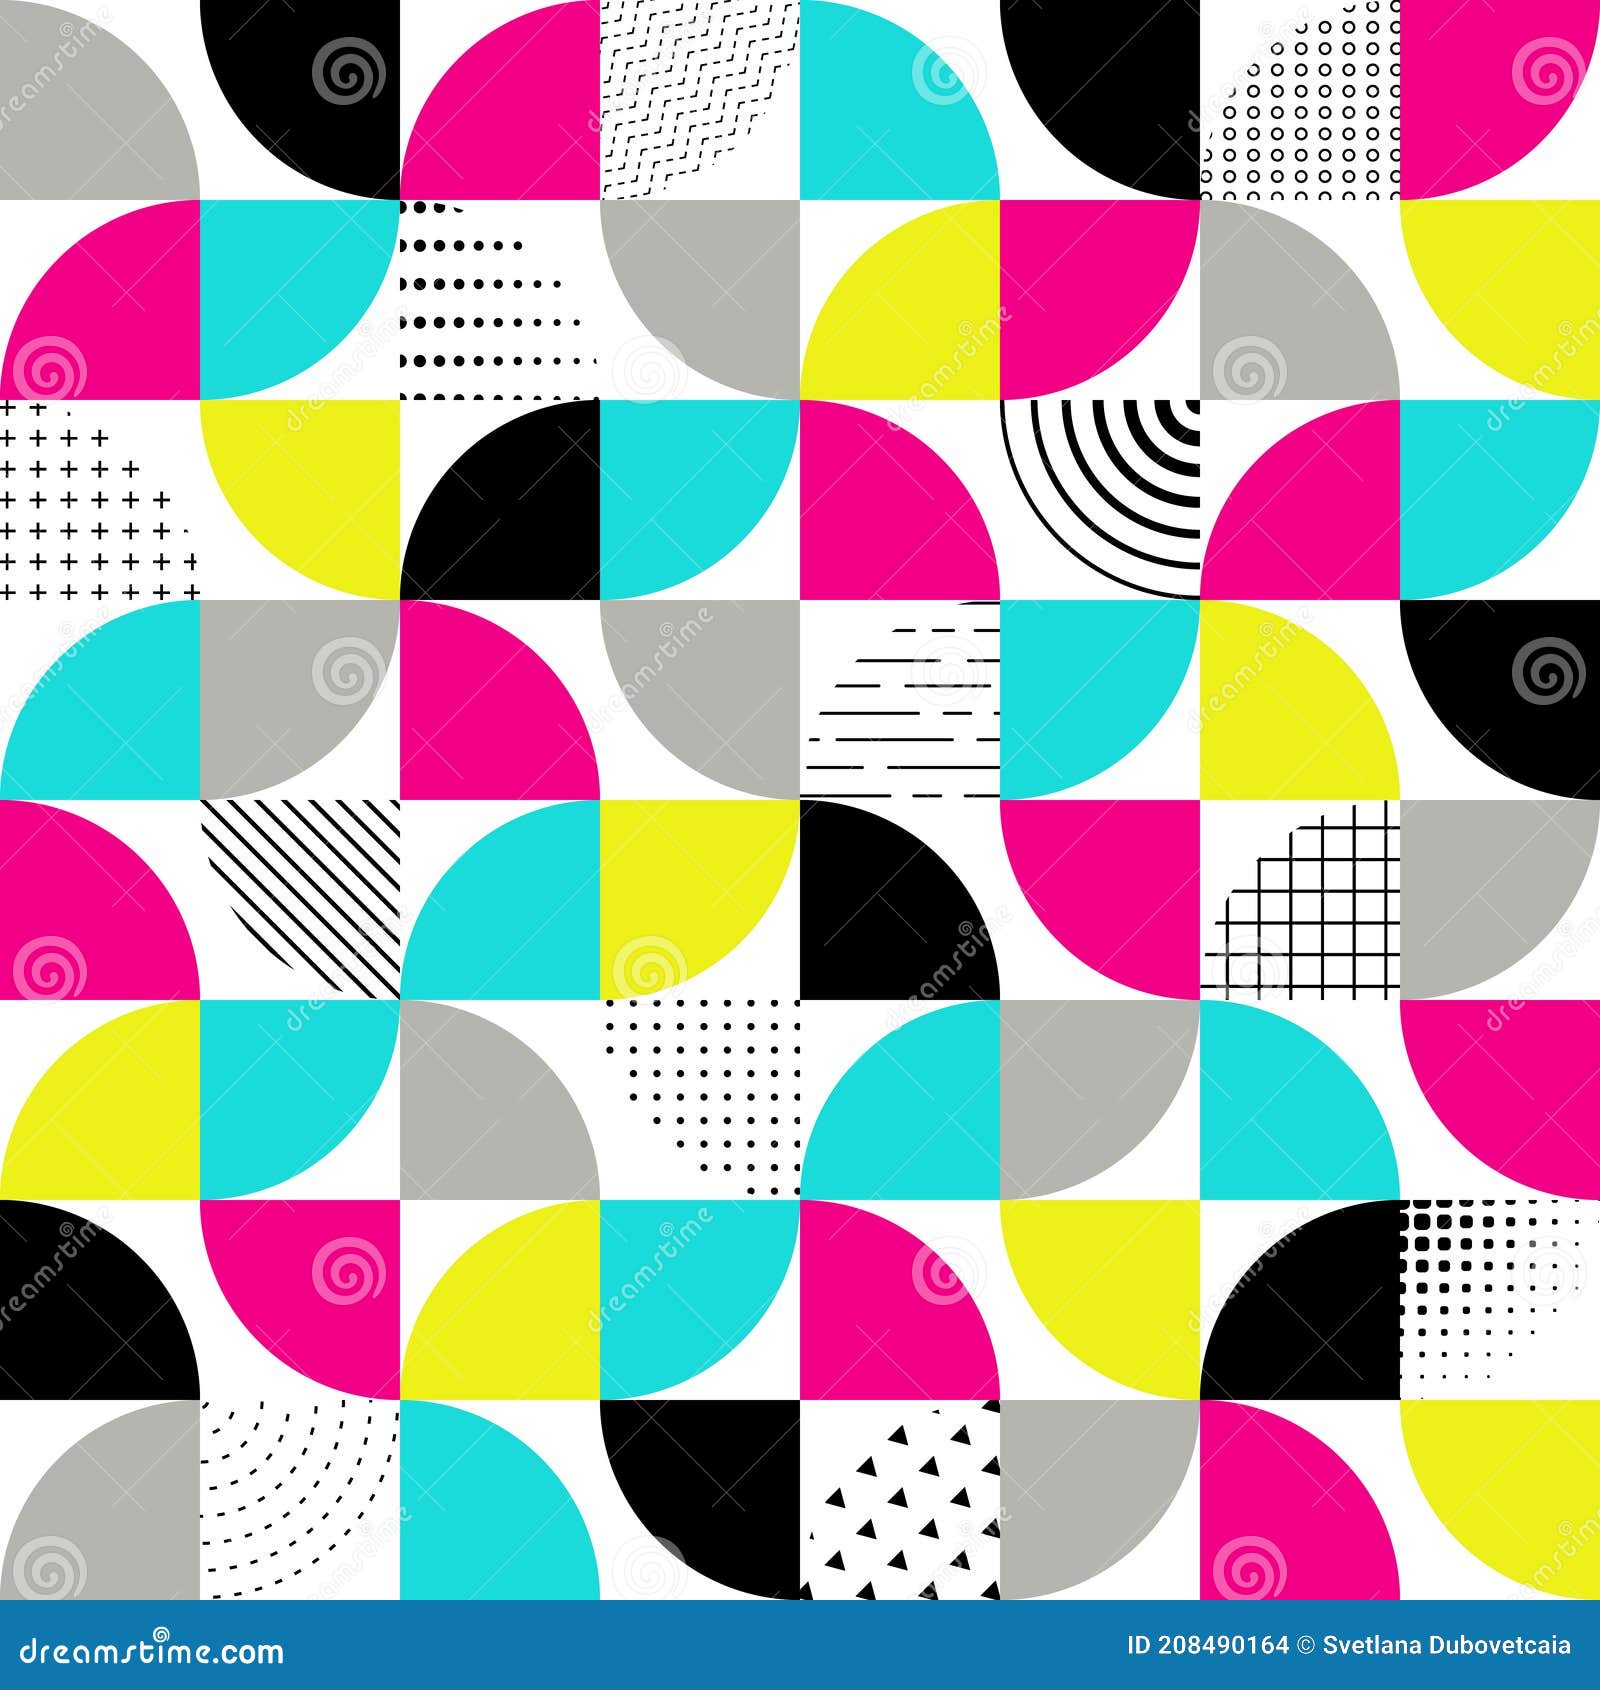 Seamless Geometric Patterns: A Collection of 9 Repeating Designs